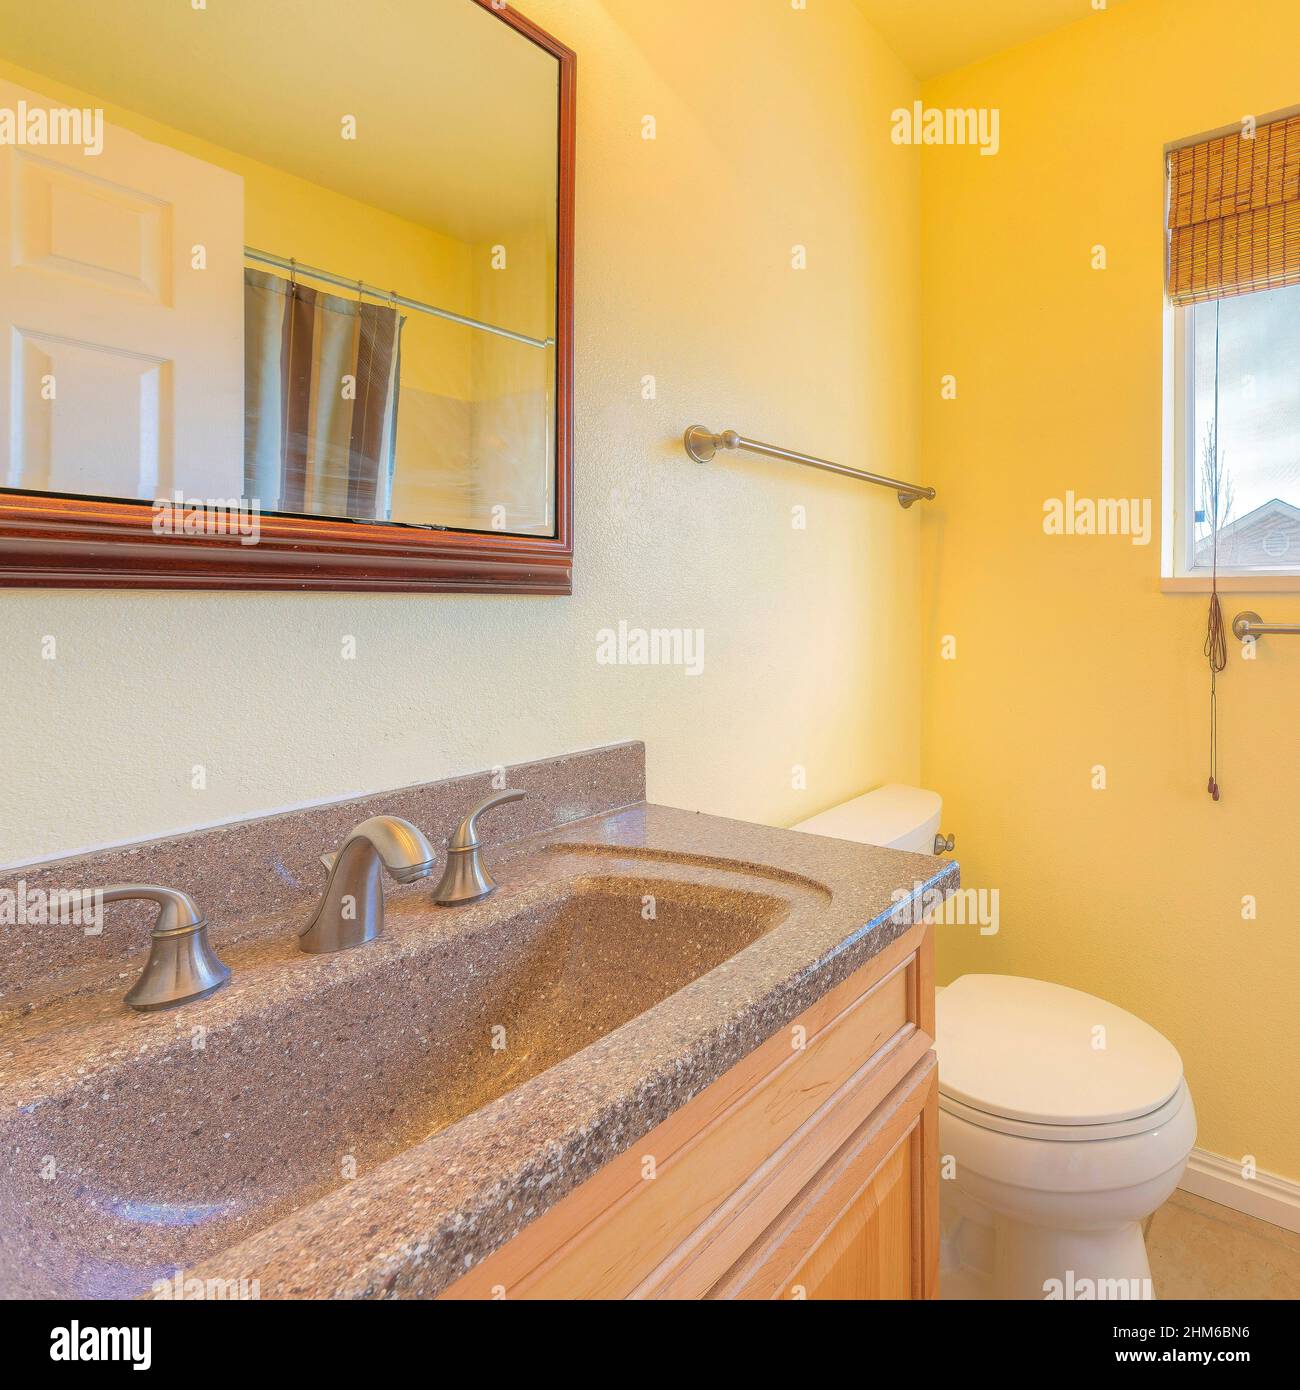 Square Small yellow bathroom interior with bamboo curtain on the window Stock Photo